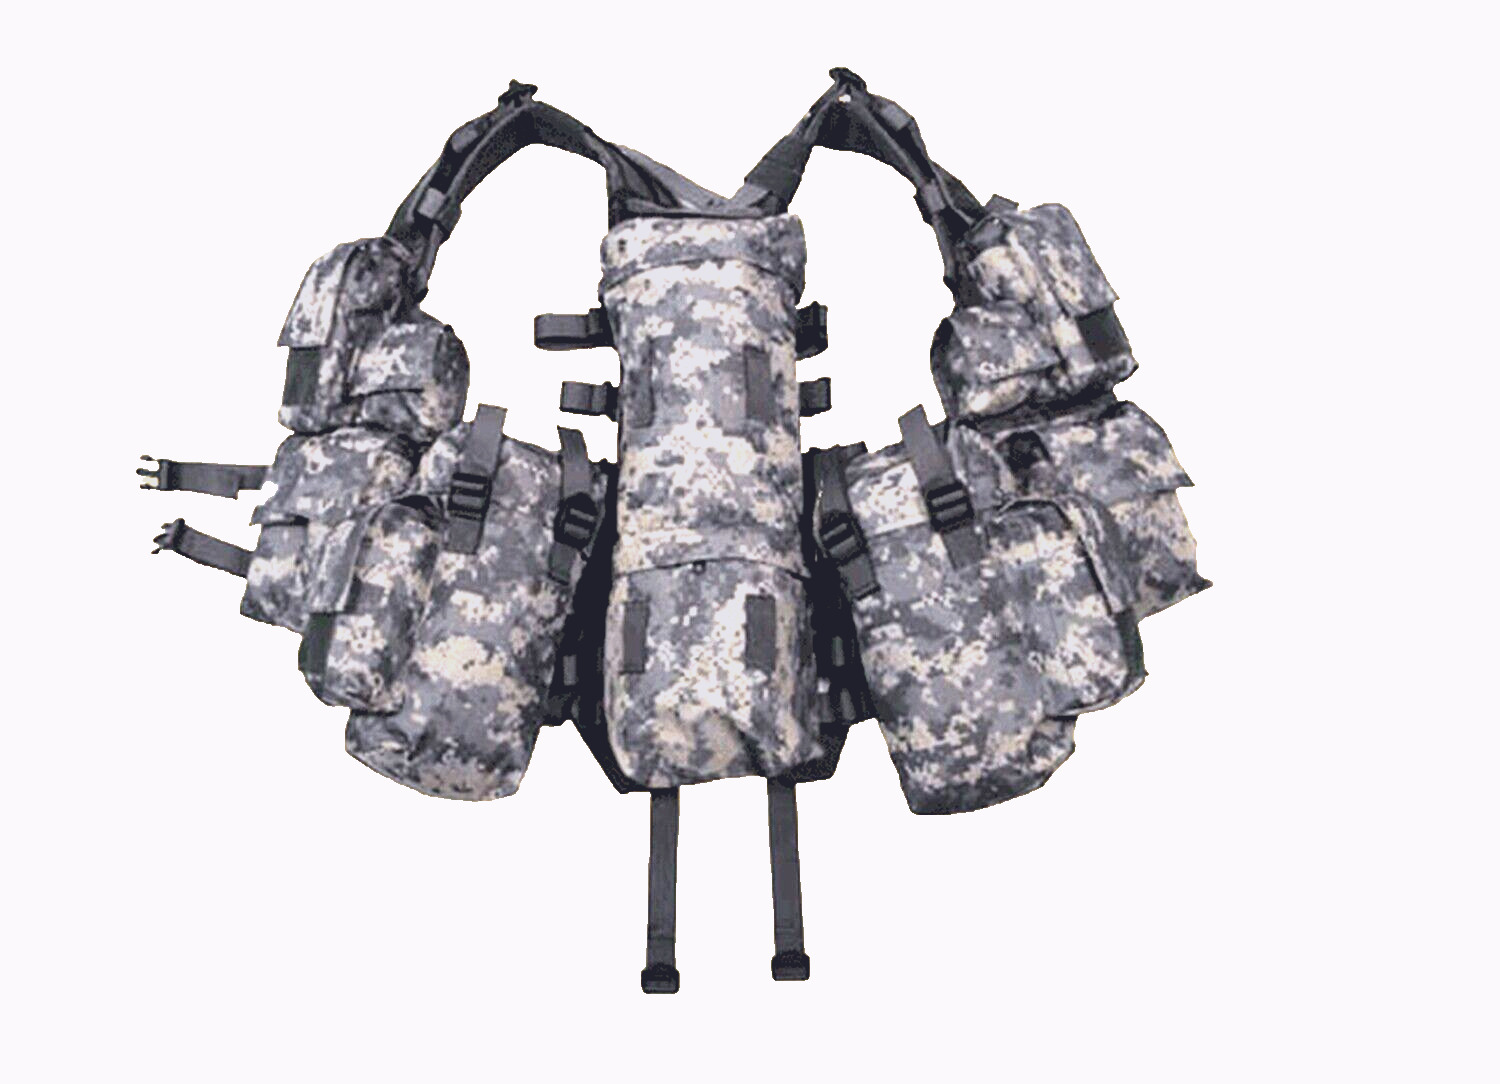 German Army Military MFH AT-Digital Camouflage Combat Tactical Vest by Sotnic